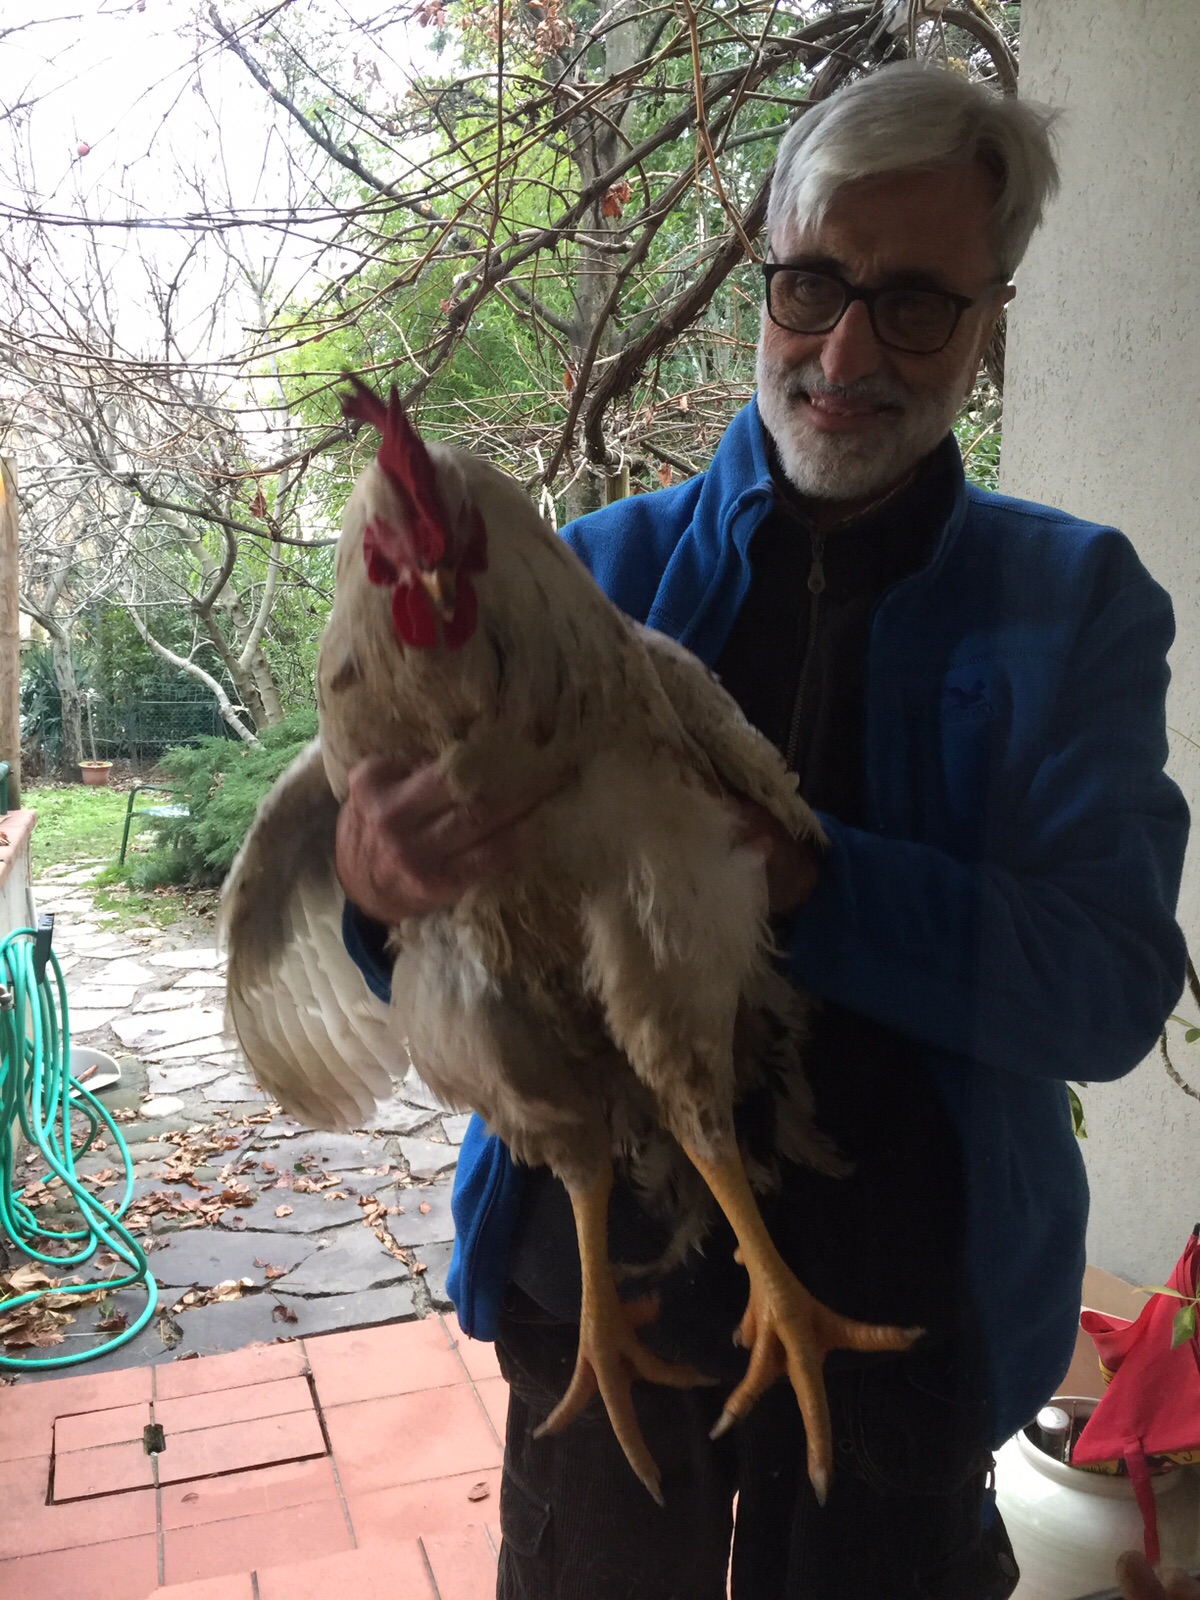 Selfie with Big Luciano, the rooster...